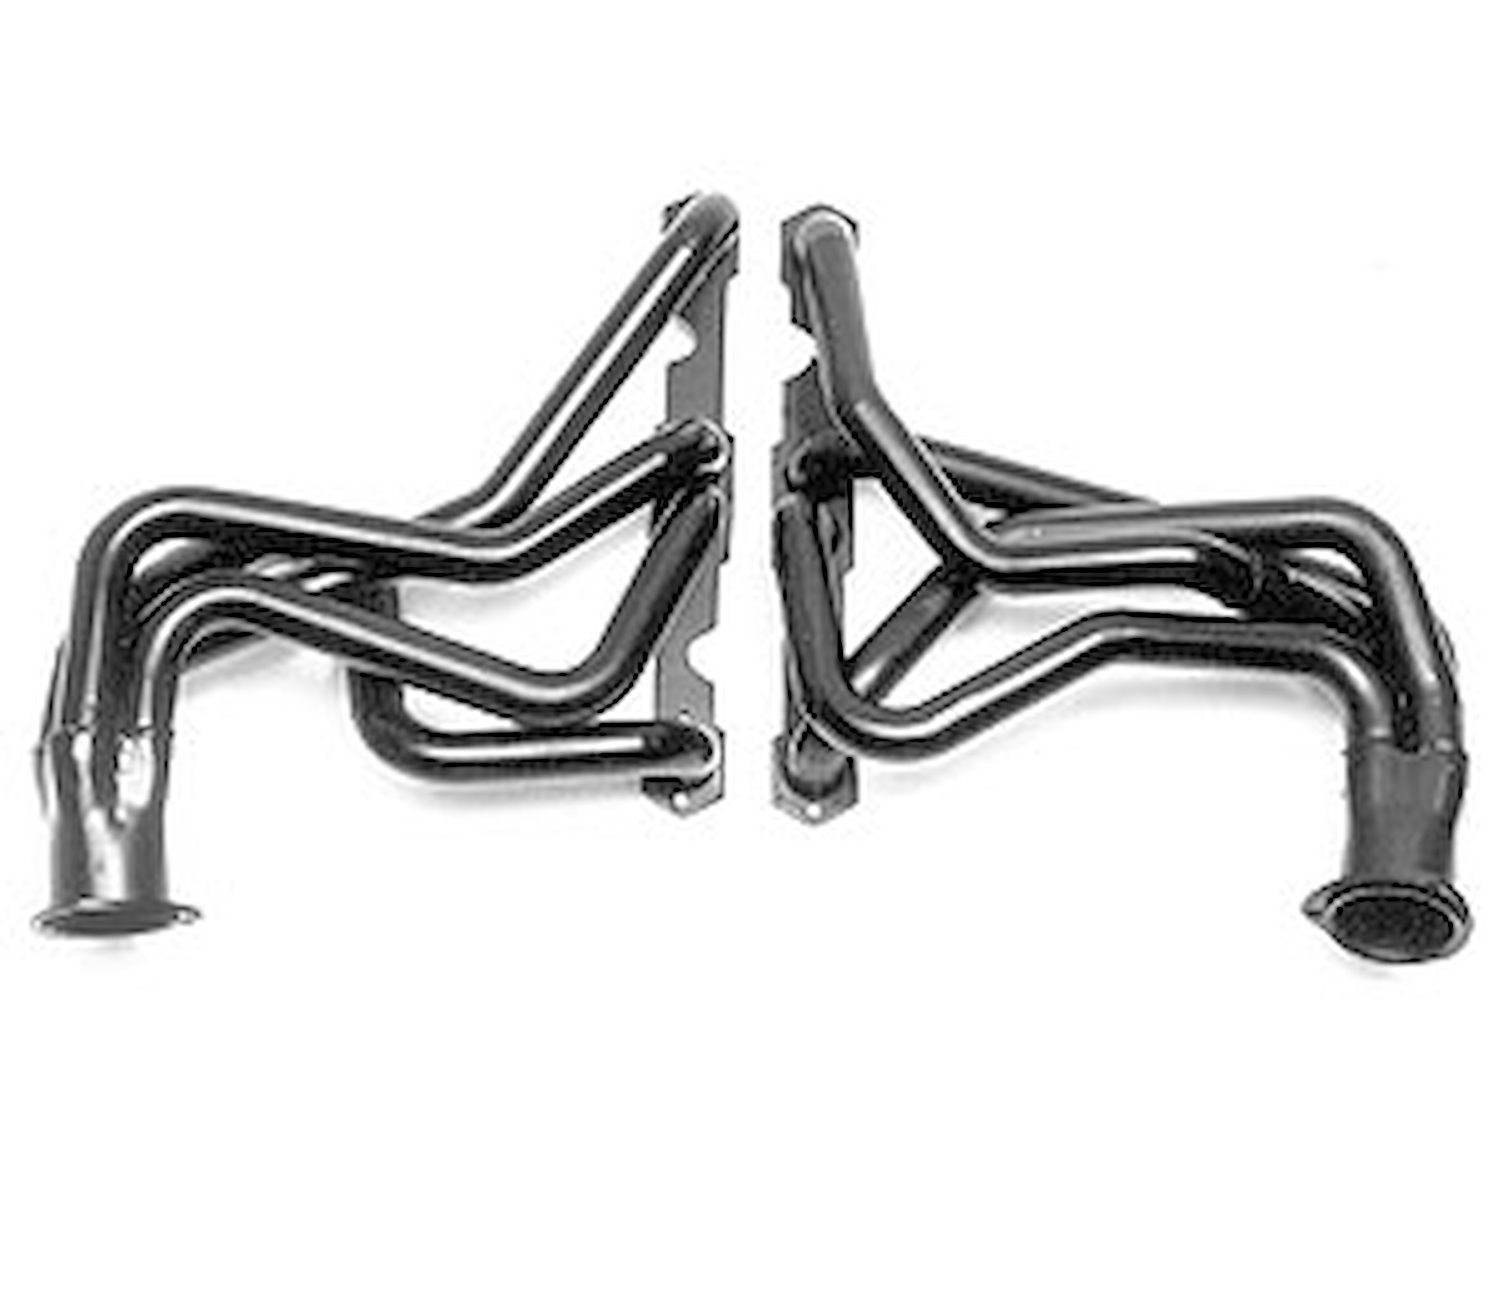 Standard Duty Uncoated Full Length Headers for 1978-87 G-Body 283-400